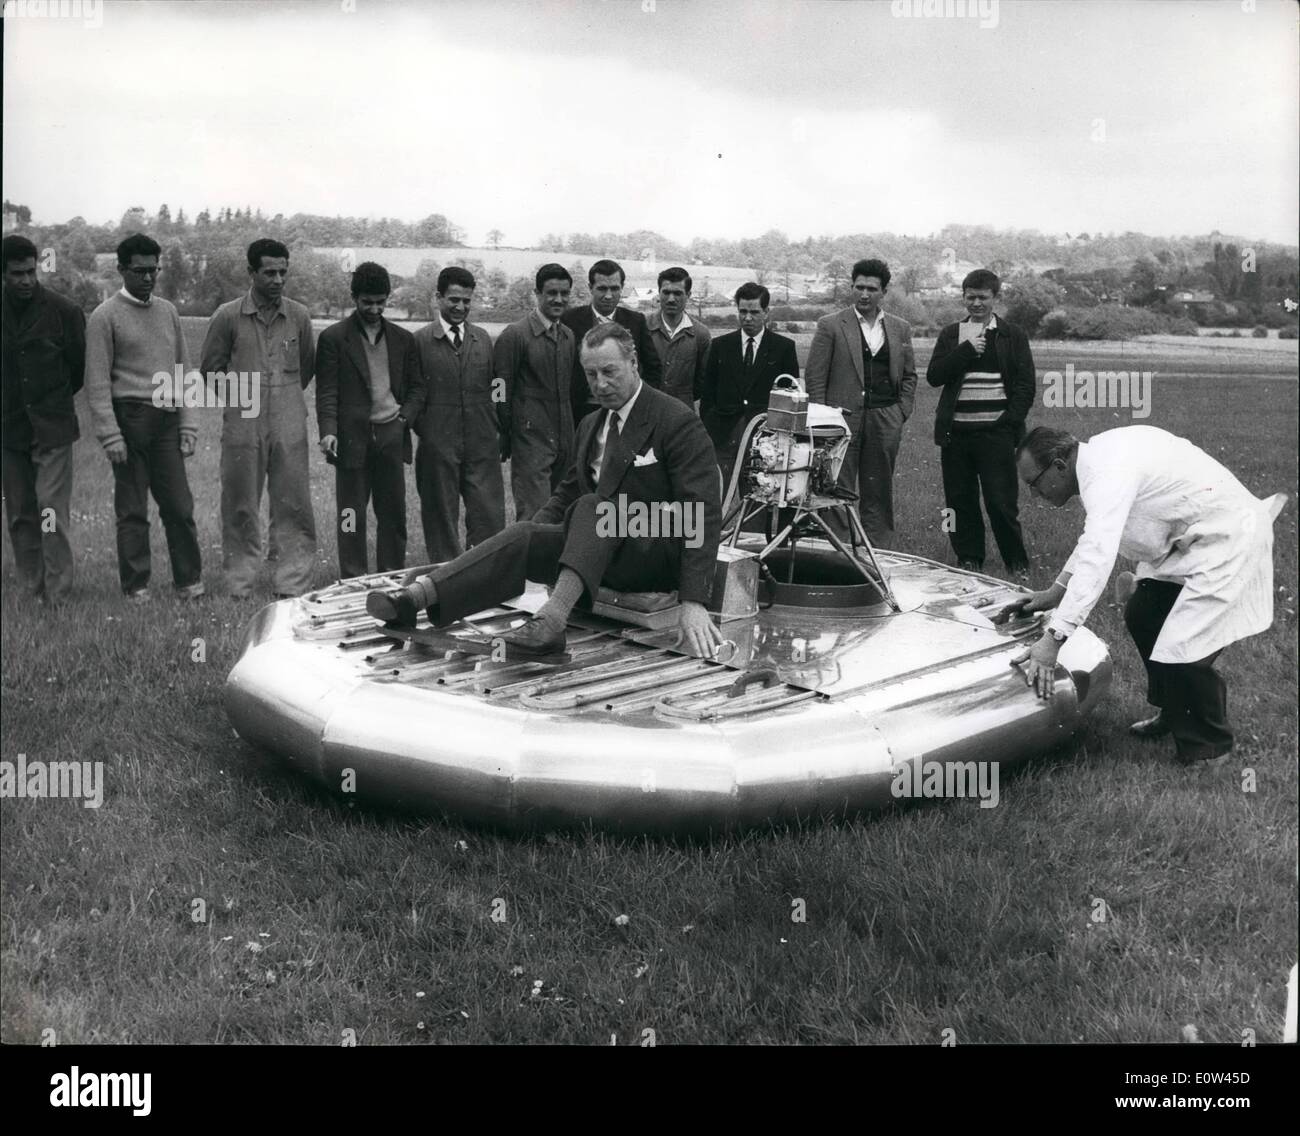 Apr. 04, 1961 - A &pound;70 Hovercraft Is Put Through Its Paces At Redhill Airfield. Another addition to Britain's steadily lengthening list of hovercraft, designed by Mr. Donald Robertson, a former test pilot, and built by the designer and staff and students of an engineering college, was demonstrated at Redhill Airfield, Surrey. It took two days to design and the materials cost &pound;70. Known as the Skimmer, it is claimed to be Britain;s first privately built hovercraft. Weighing only 250 pounds, it is powered by a 40 hp water-cooled outboard motor Stock Photo